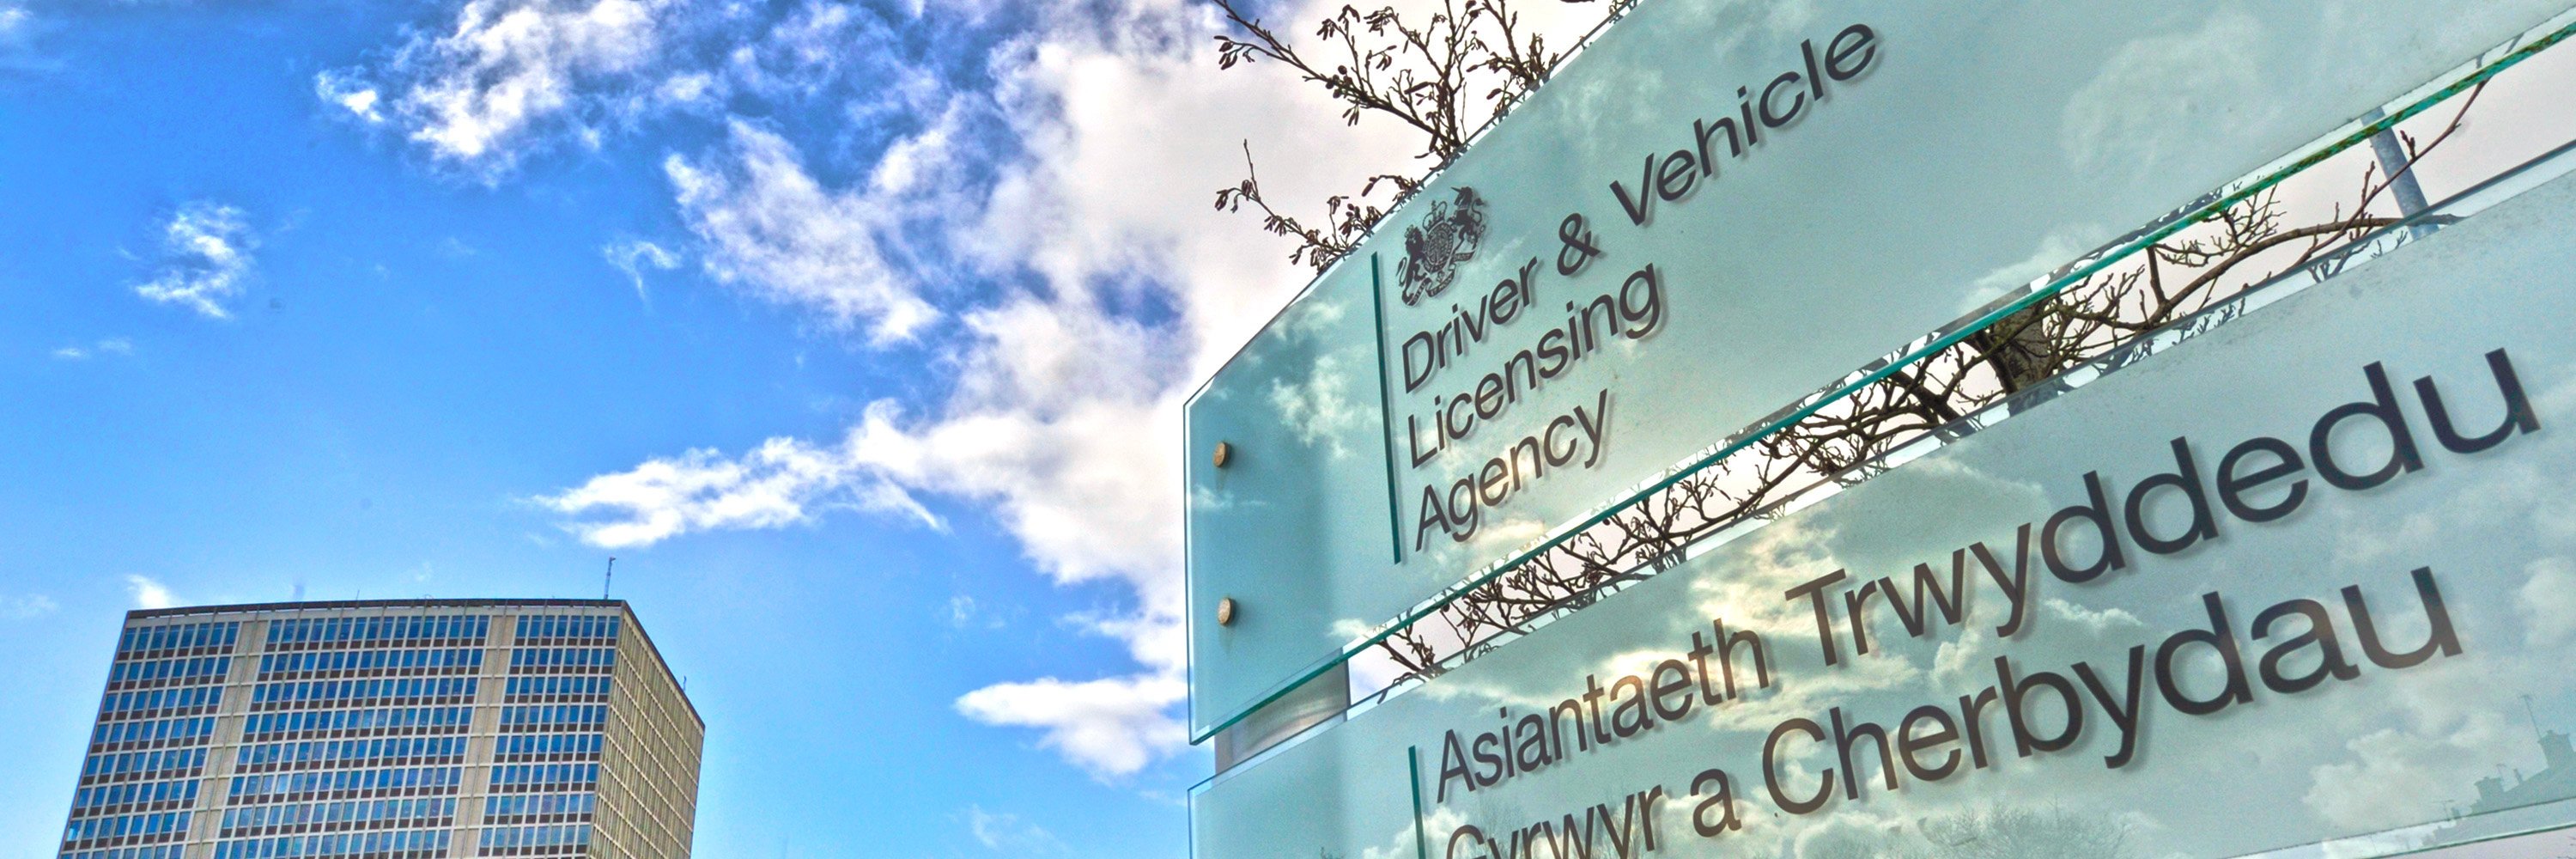 Dvla Brings It Back In House After Decades Of Outsourcing